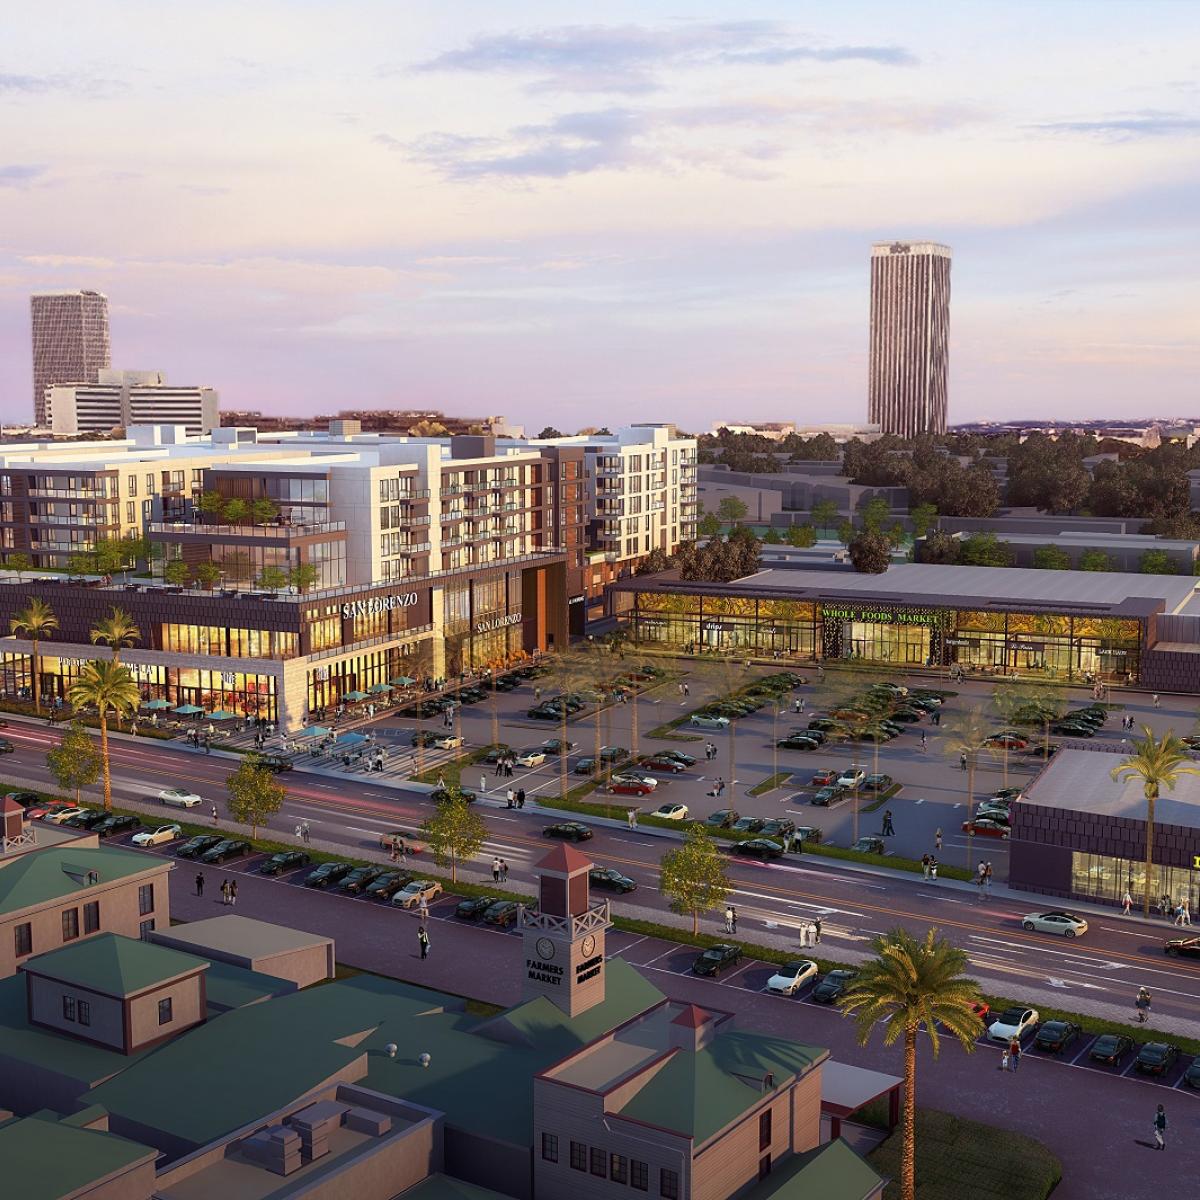 Big mixed-use complex on the rise at 6300 W 3rd Street | Urbanize LA